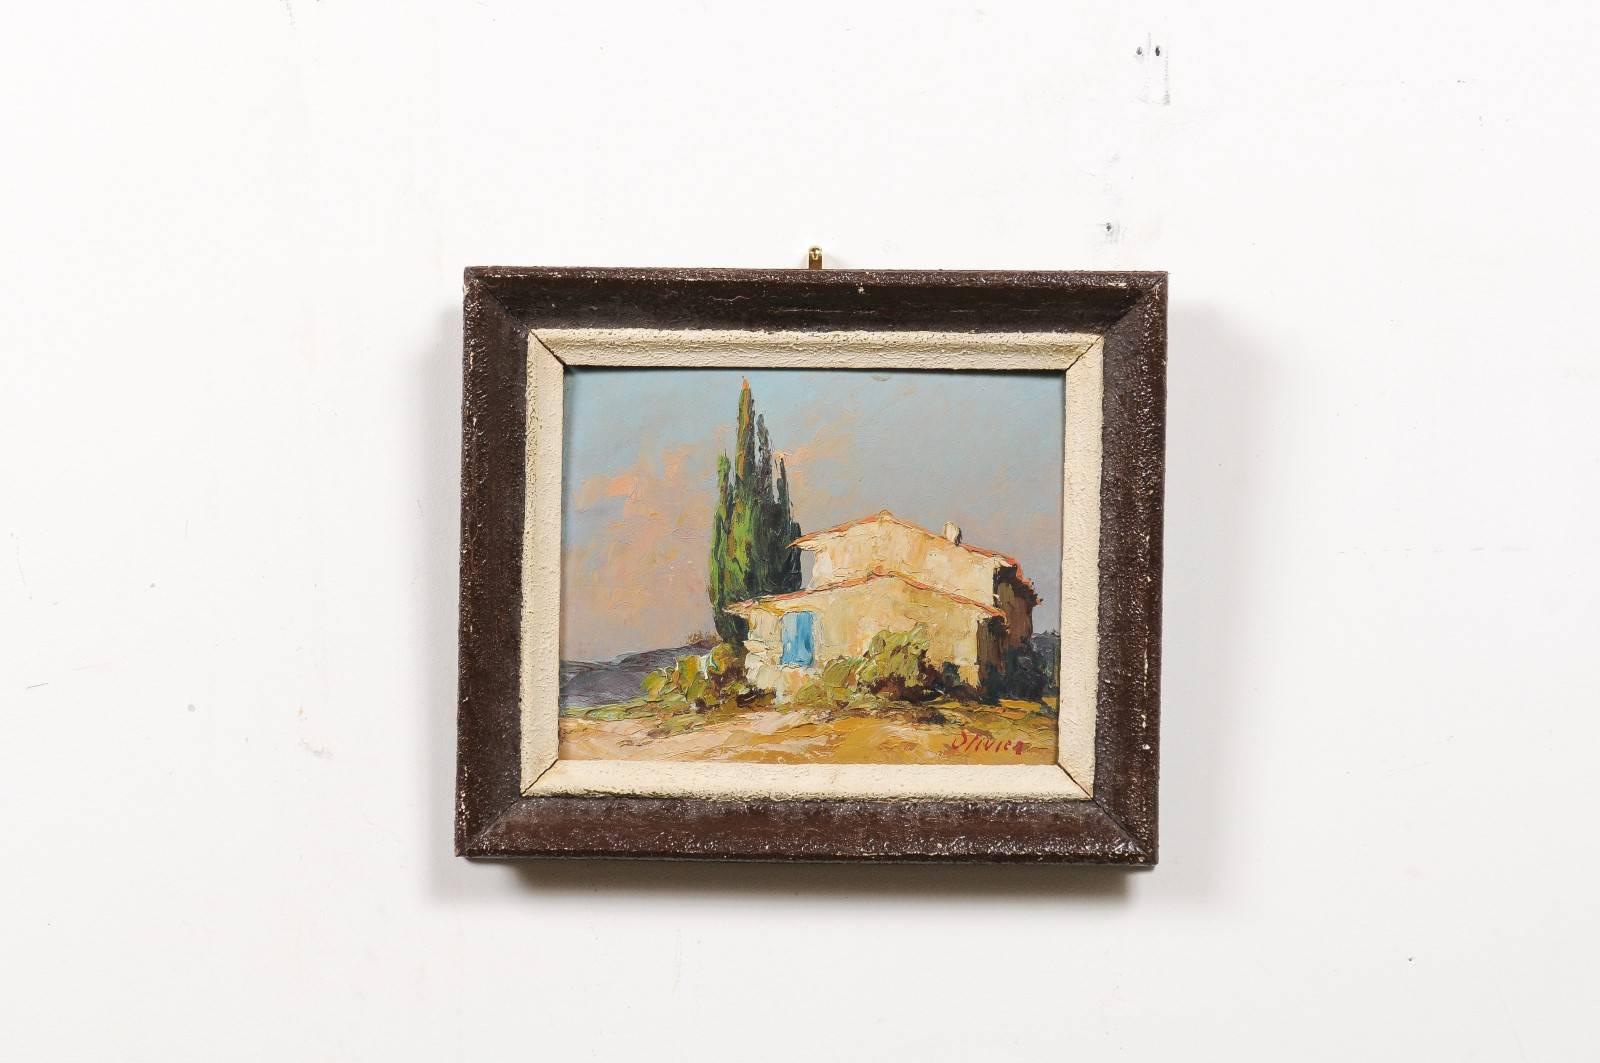 A petite French framed oil painting from the late 19th century from Aix-en-Provence, depicting a country Provençal scene. Born during the later years of the tumultuous 19th century, this petite painting was found in Aix-en-Provence, birth place of